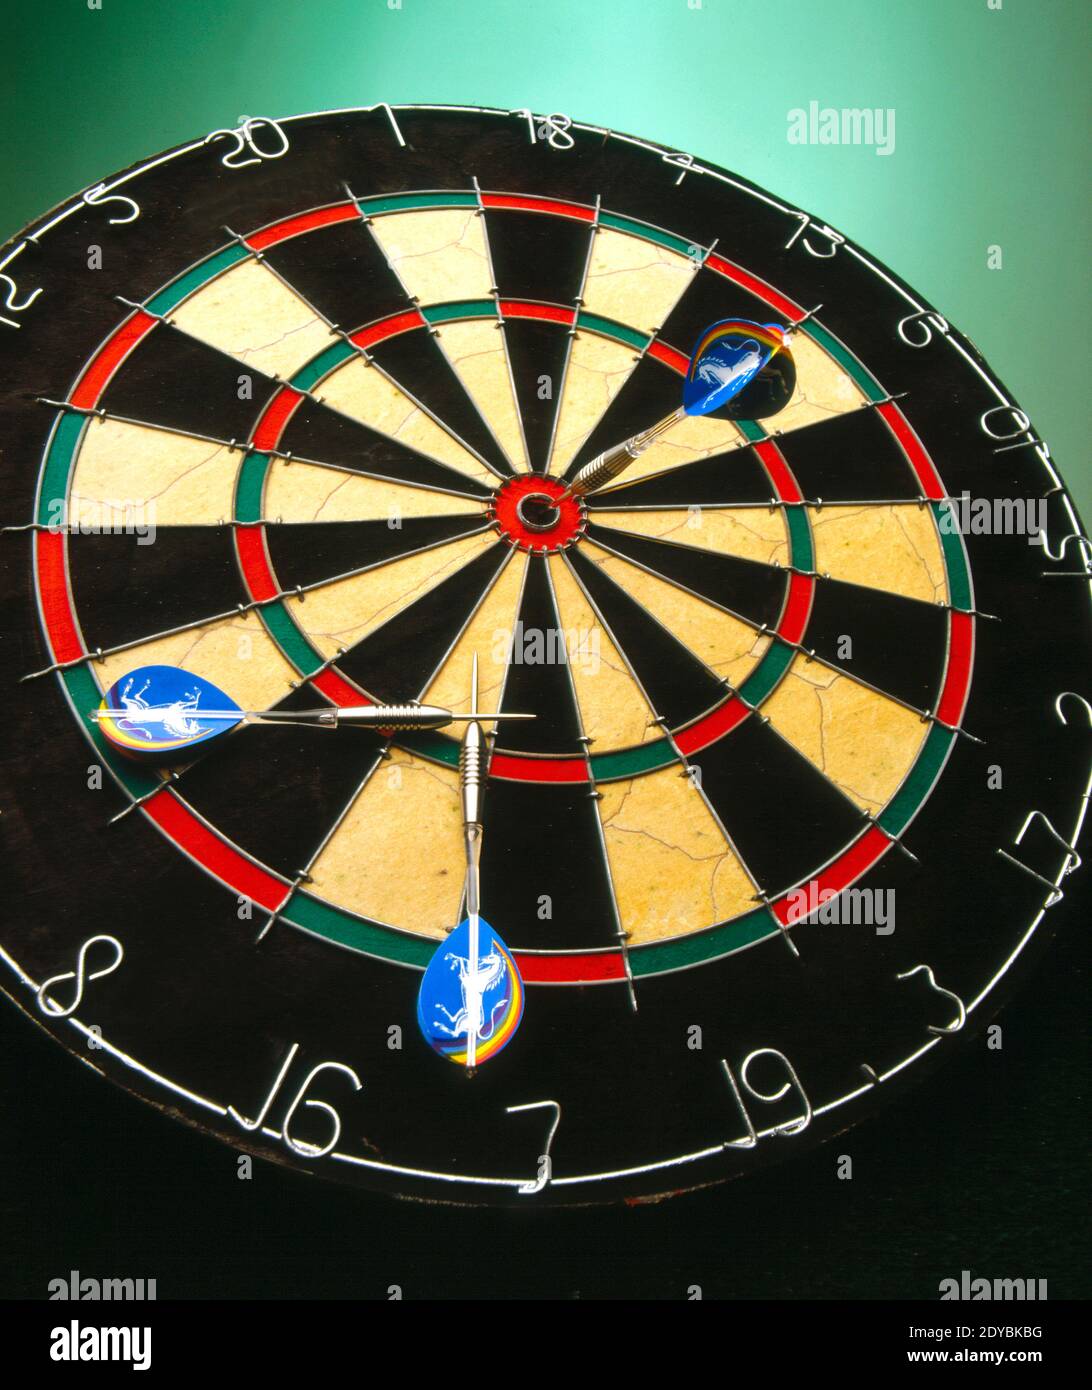 Darts game in detail. Darts strategy and rules Stock Photo - Alamy